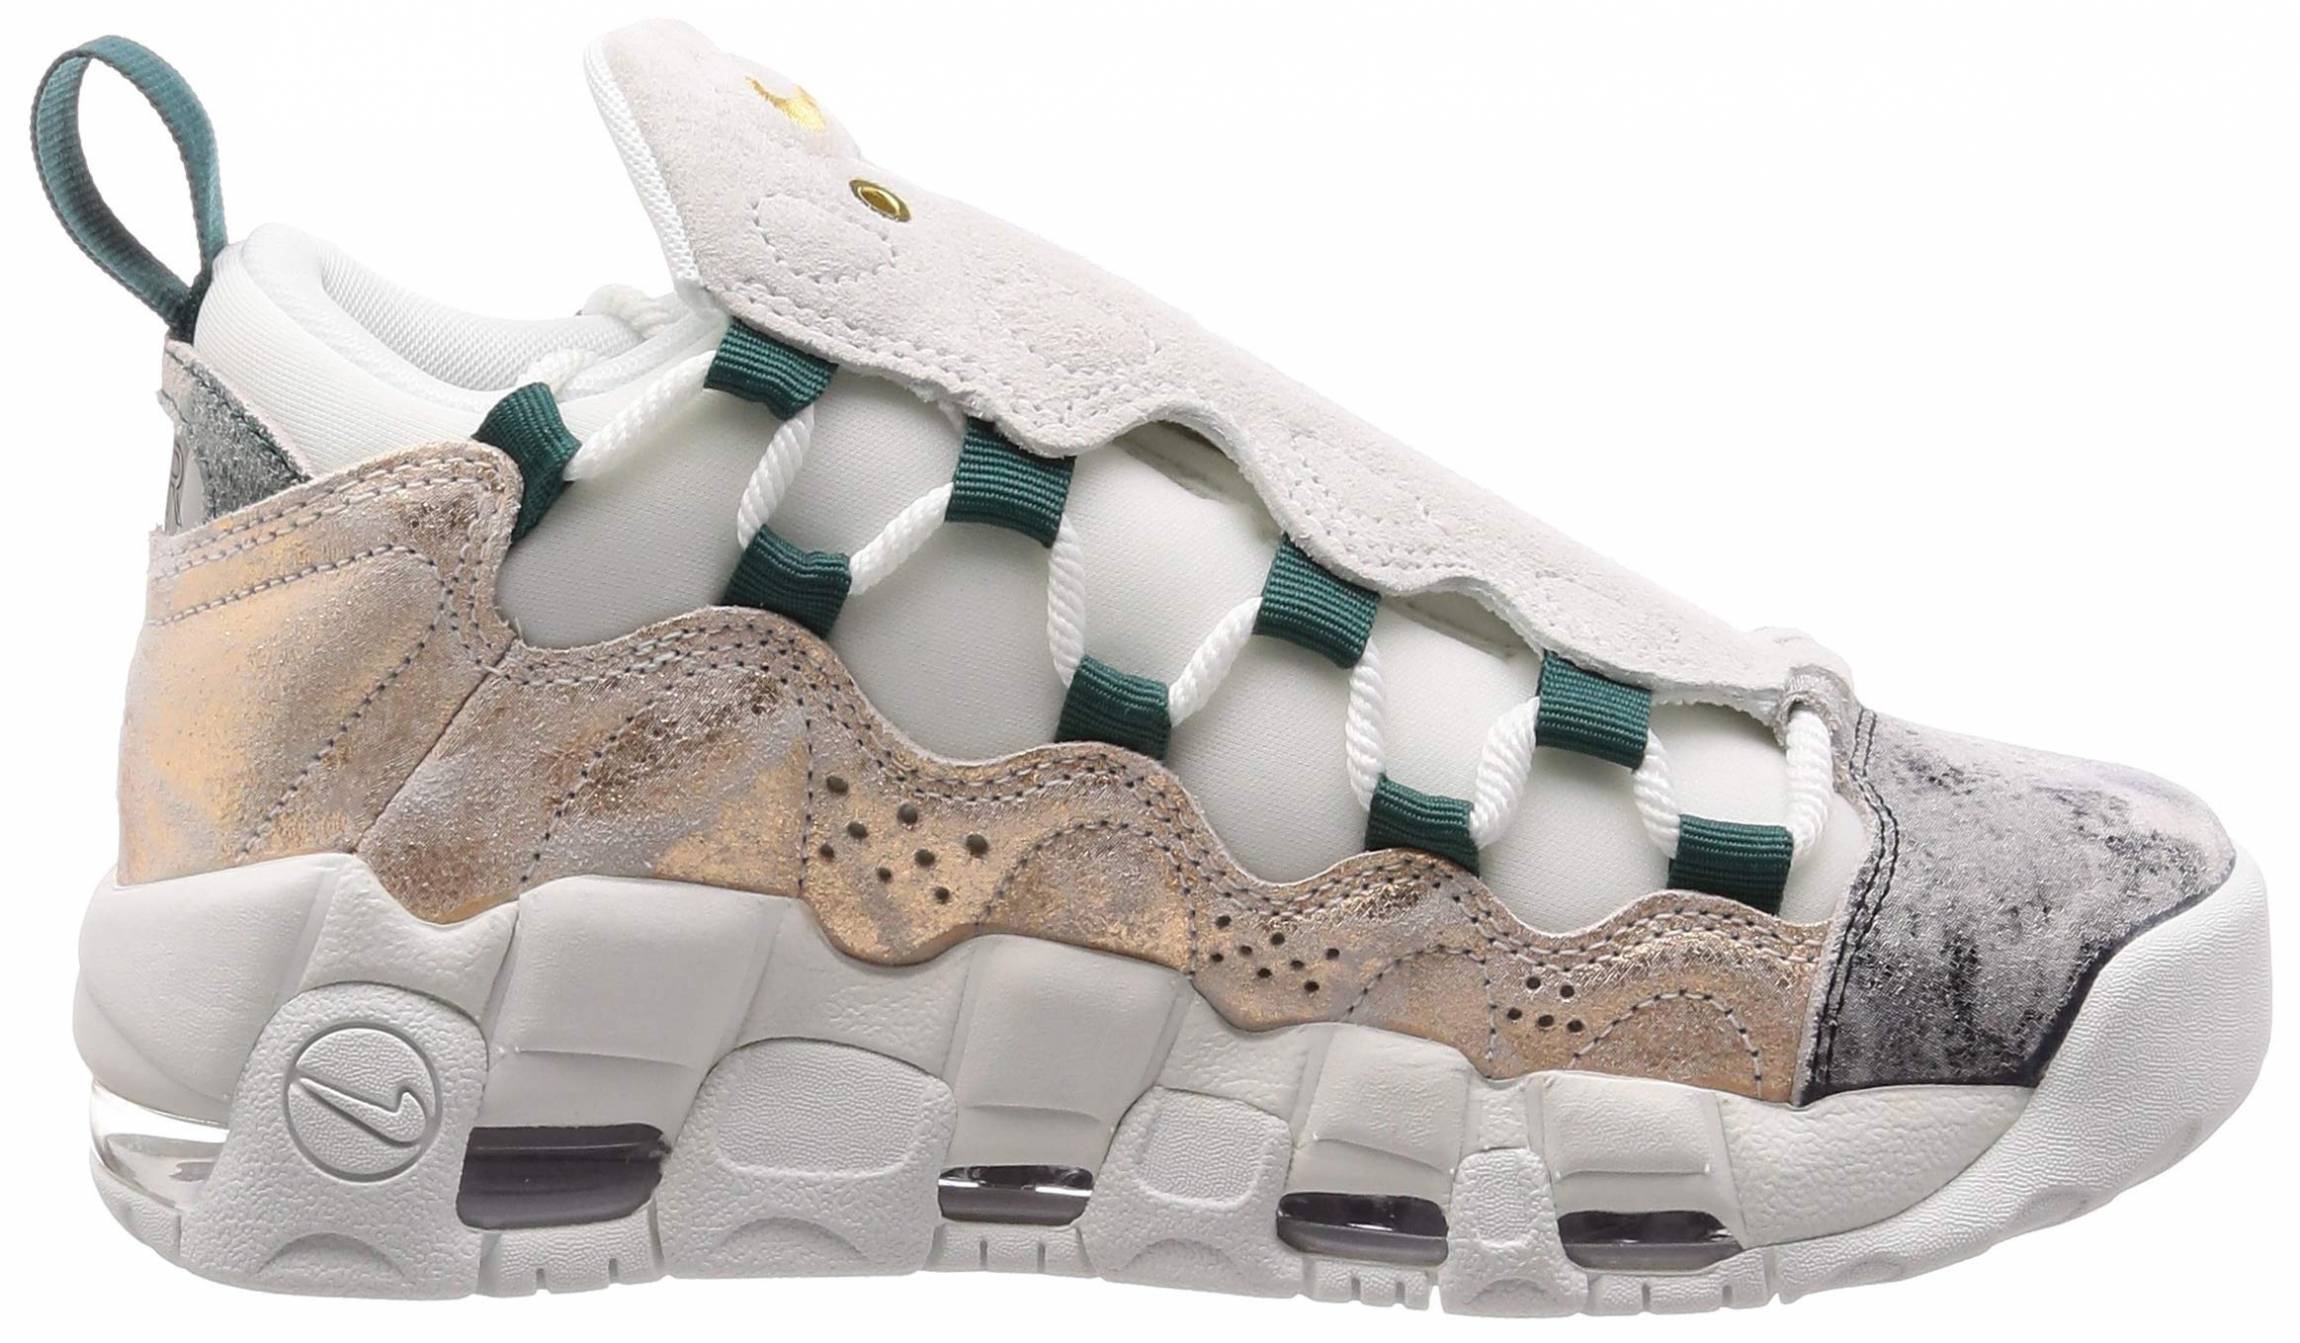 Nike Air More Money LX sneakers in white (only $149) | RunRepeat